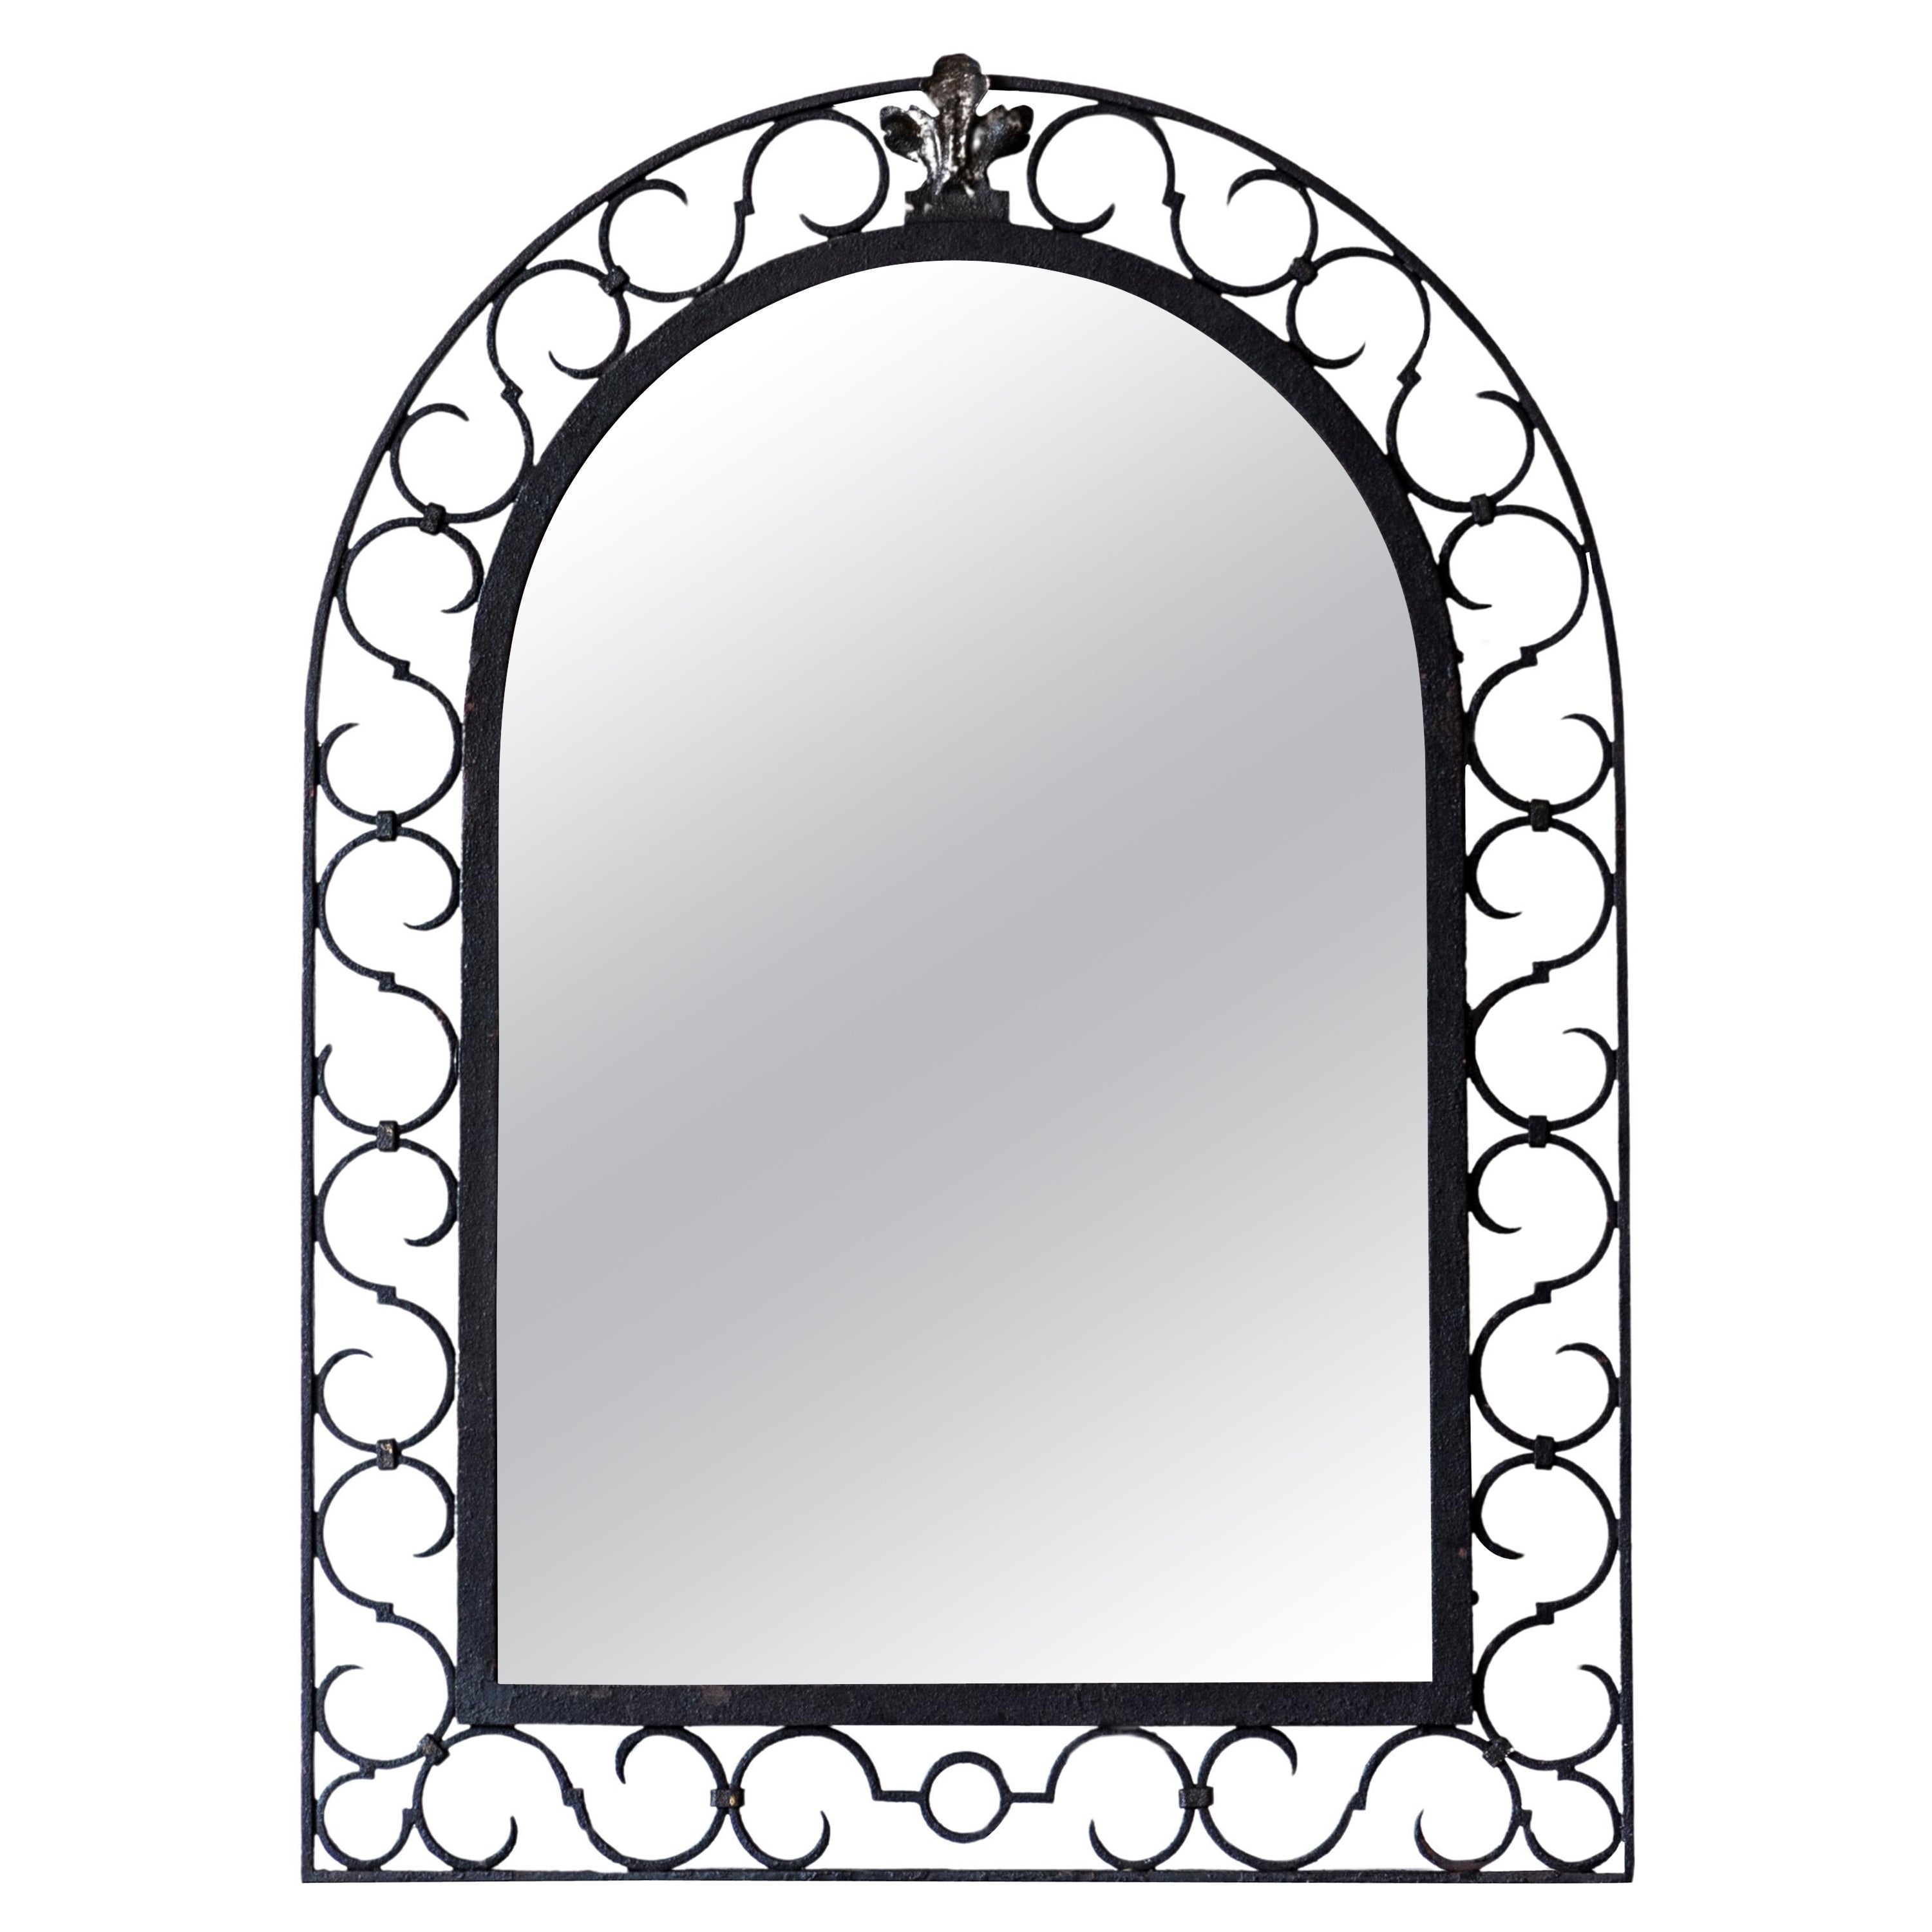 French Iron Arching Mirror with Openwork S-Scroll Motifs and Foliage Crest For Sale